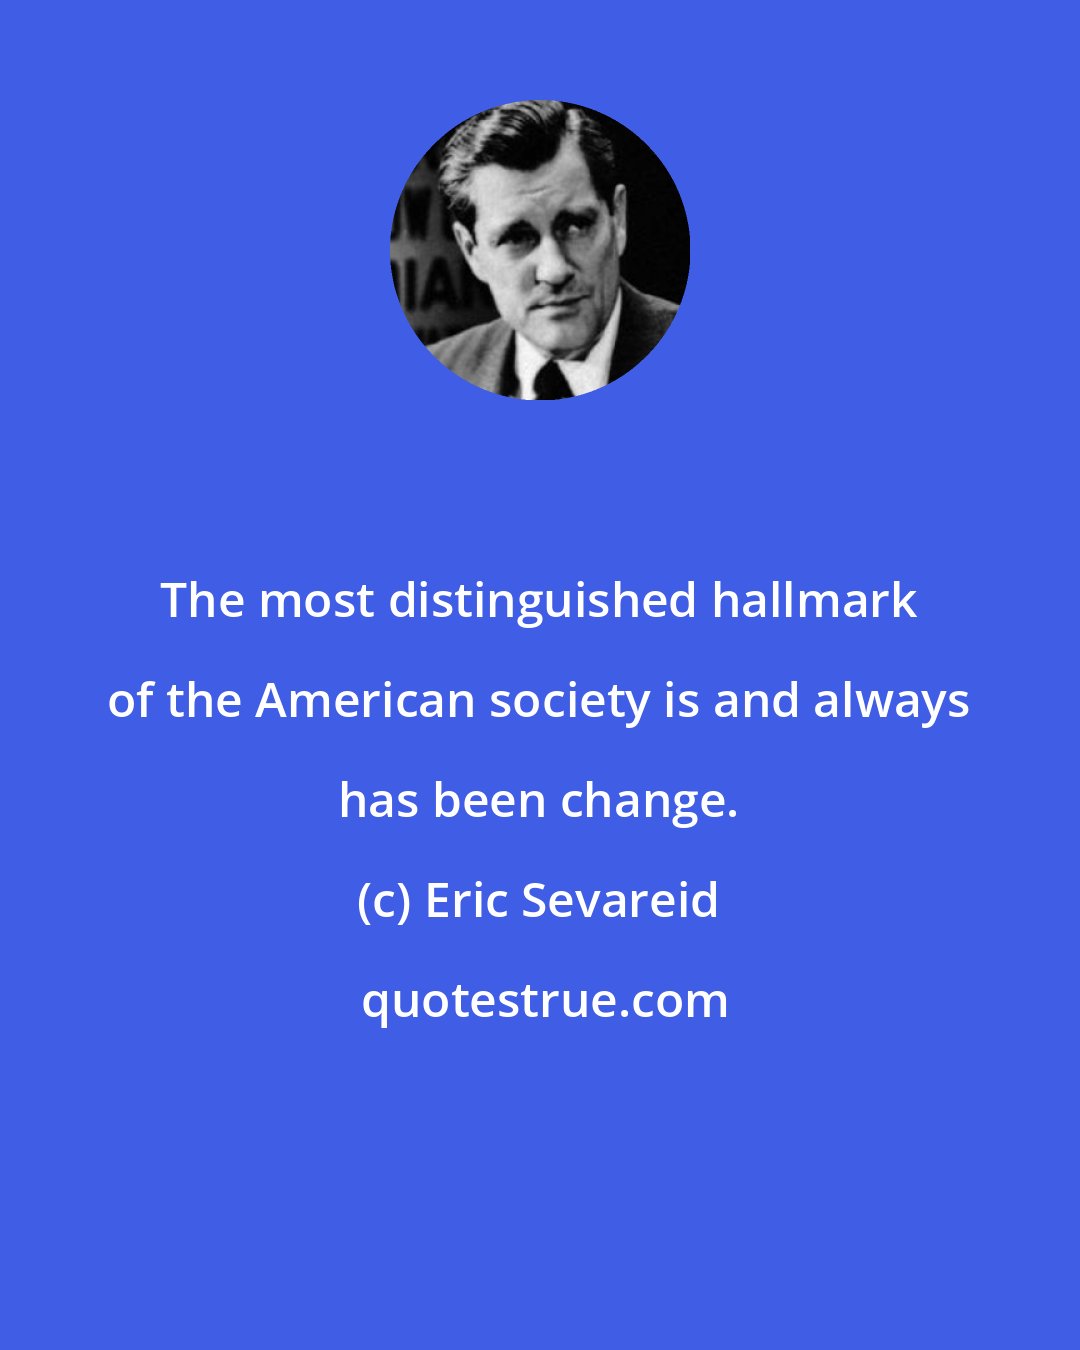 Eric Sevareid: The most distinguished hallmark of the American society is and always has been change.